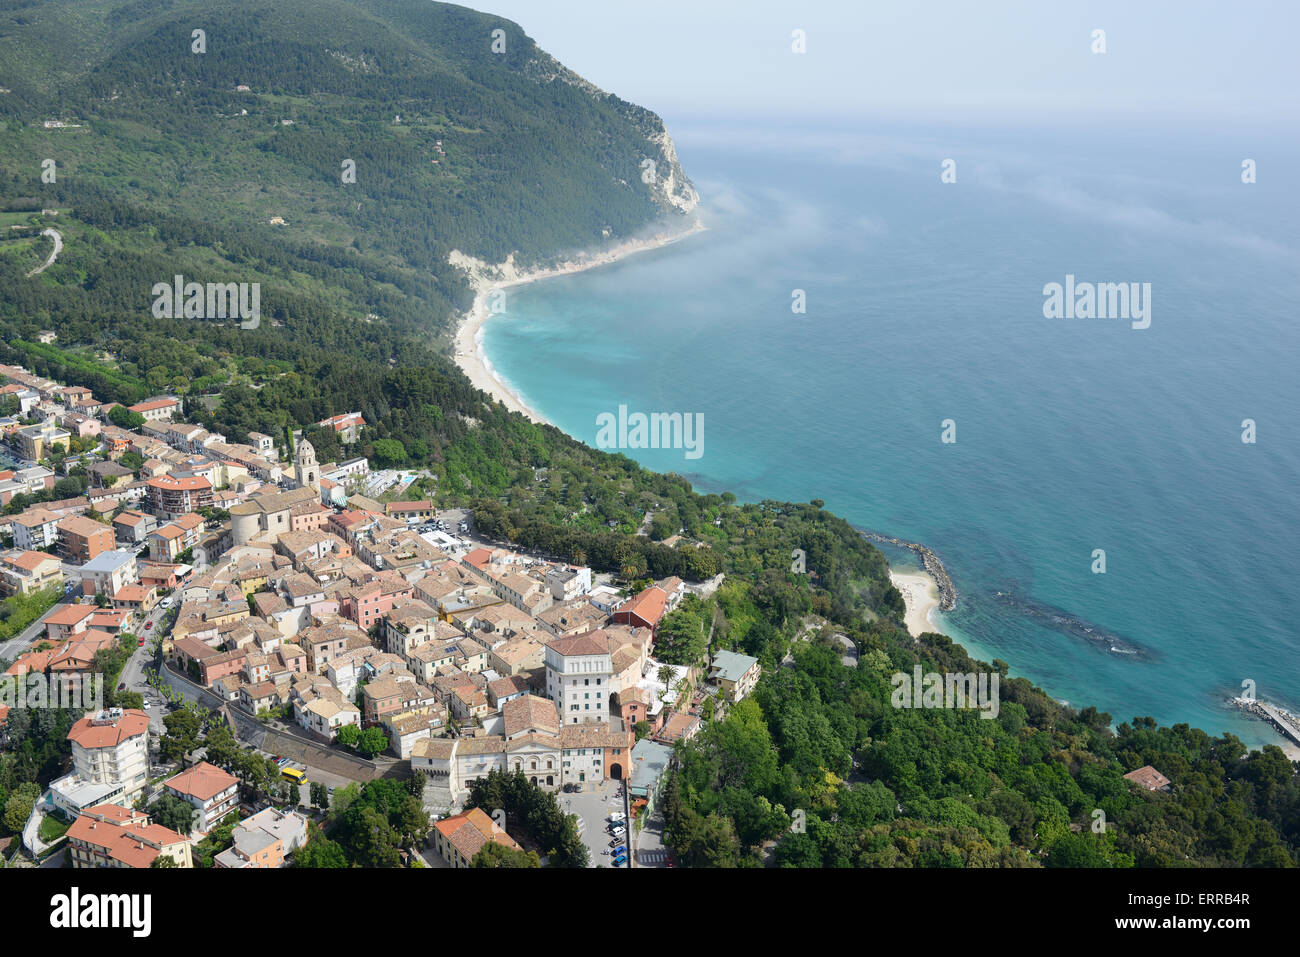 AERIAL VIEW. Picturesque village in a natural setting overlooking the Adriatic Sea. Sirolo, Province of Ancona, Marche, Italy. Stock Photo